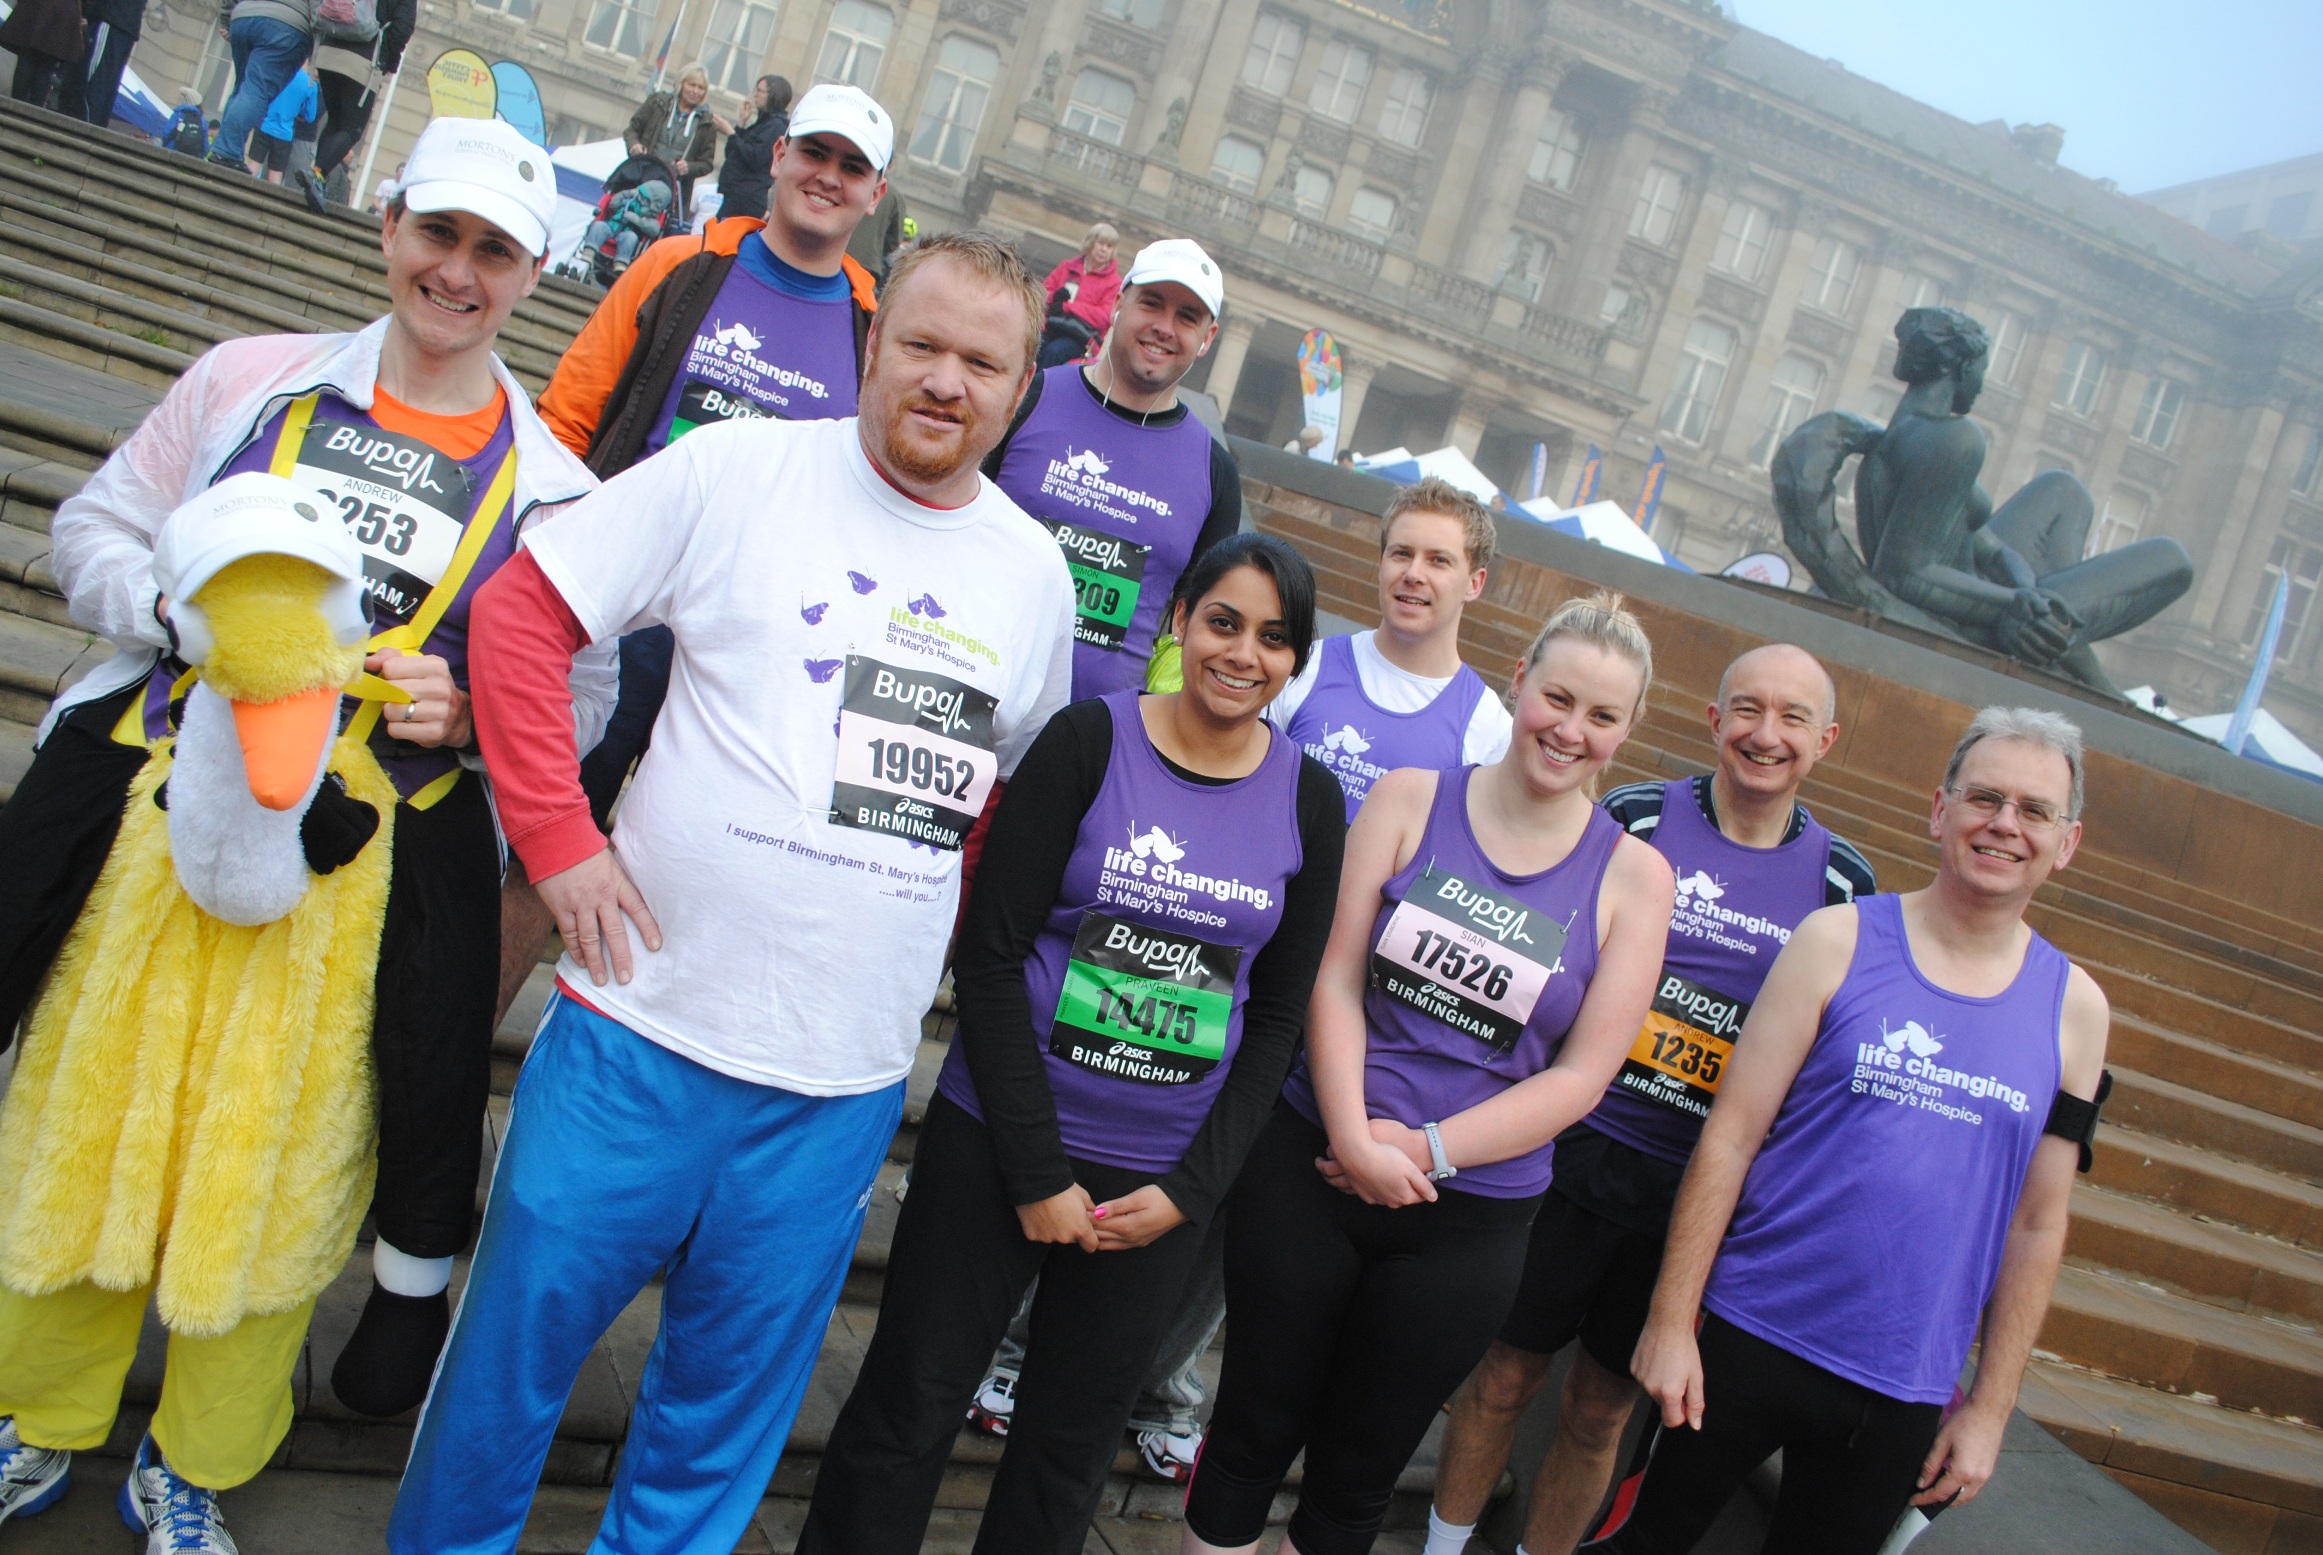 Runners get ready for the Great Birmingham Run in 2012 which raised over £30k for Birmingham St Mary's Hospice